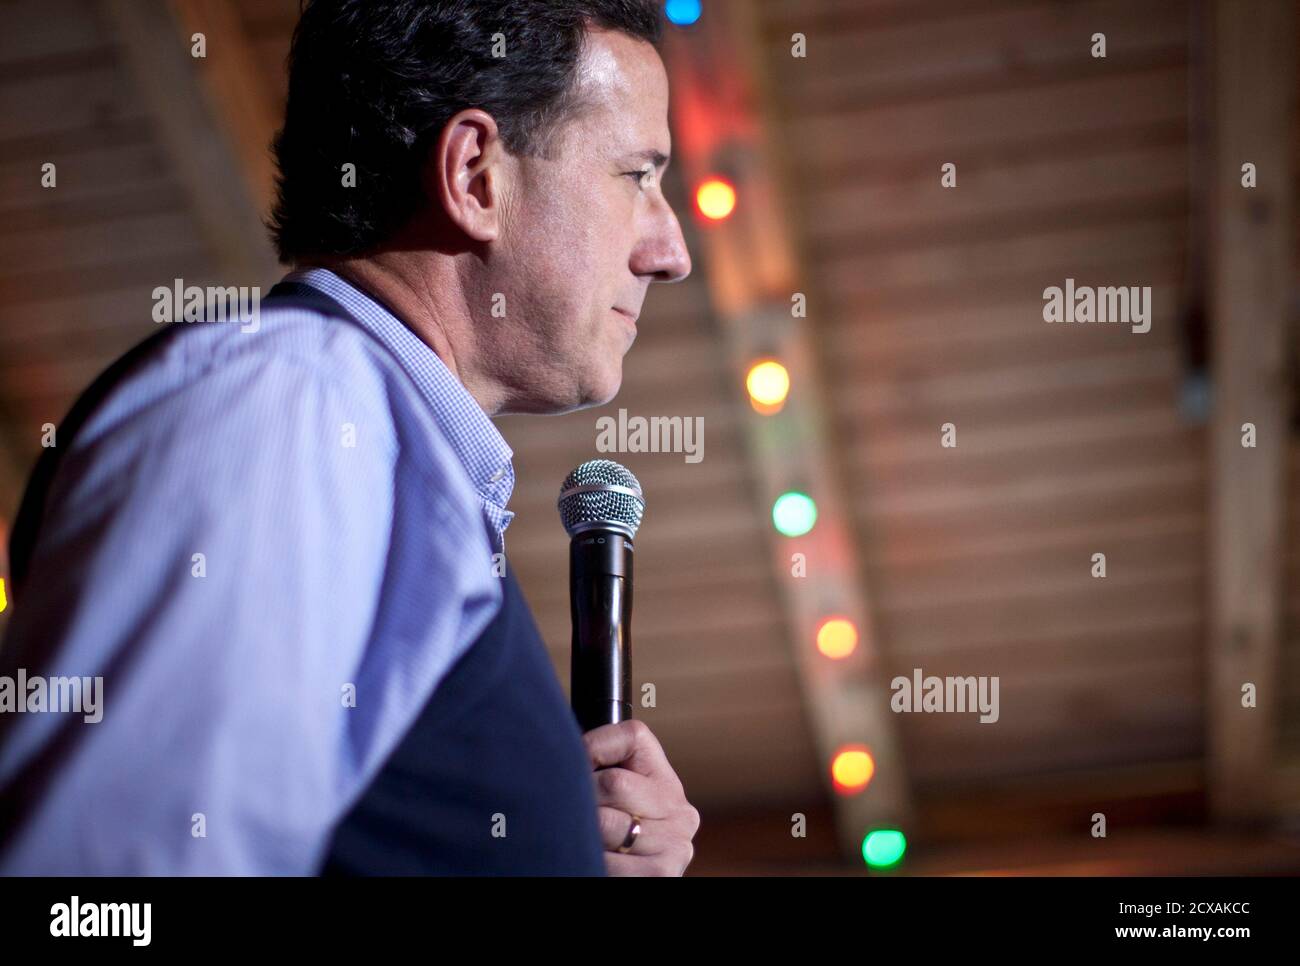 U.S. presidential Republican primary candidate Rick Santorum talks during a campaign rally at Hudson's Smokehouse in Lexington, South Carolina January 20, 2012. REUTERS/Benjamin Myers    (UNITED STATES - Tags: POLITICS ELECTIONS) Stock Photo